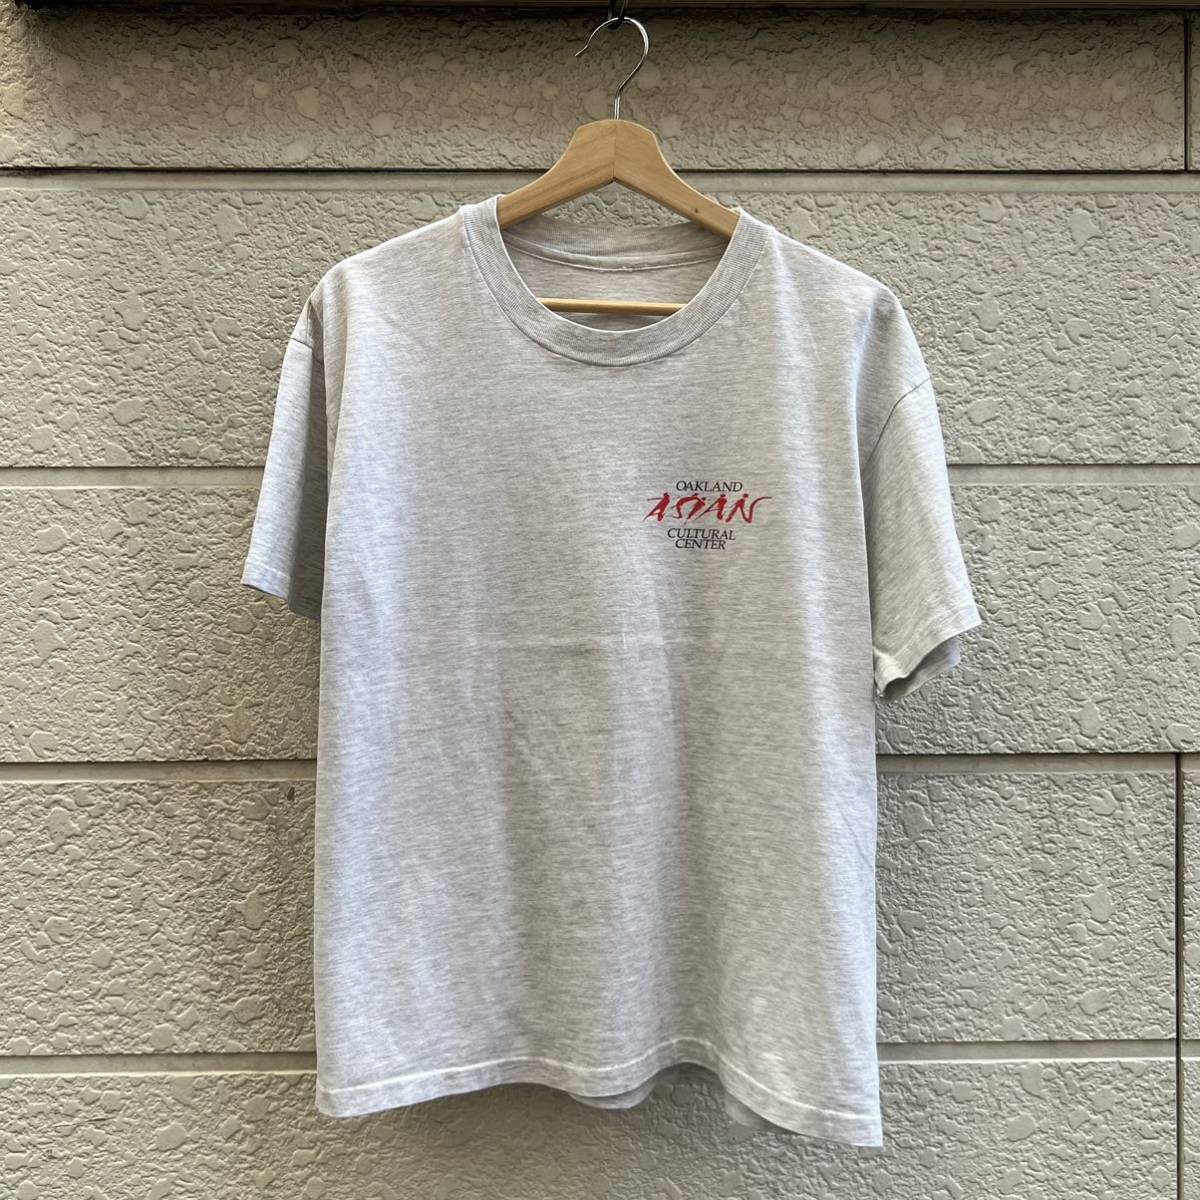 80s 90s USA古着 半袖Tシャツ プリントTシャツ グレー シングルステッチ ASIAN CULTURAL CENTER アメリカ古着 vintage ヴィンテージ_画像2